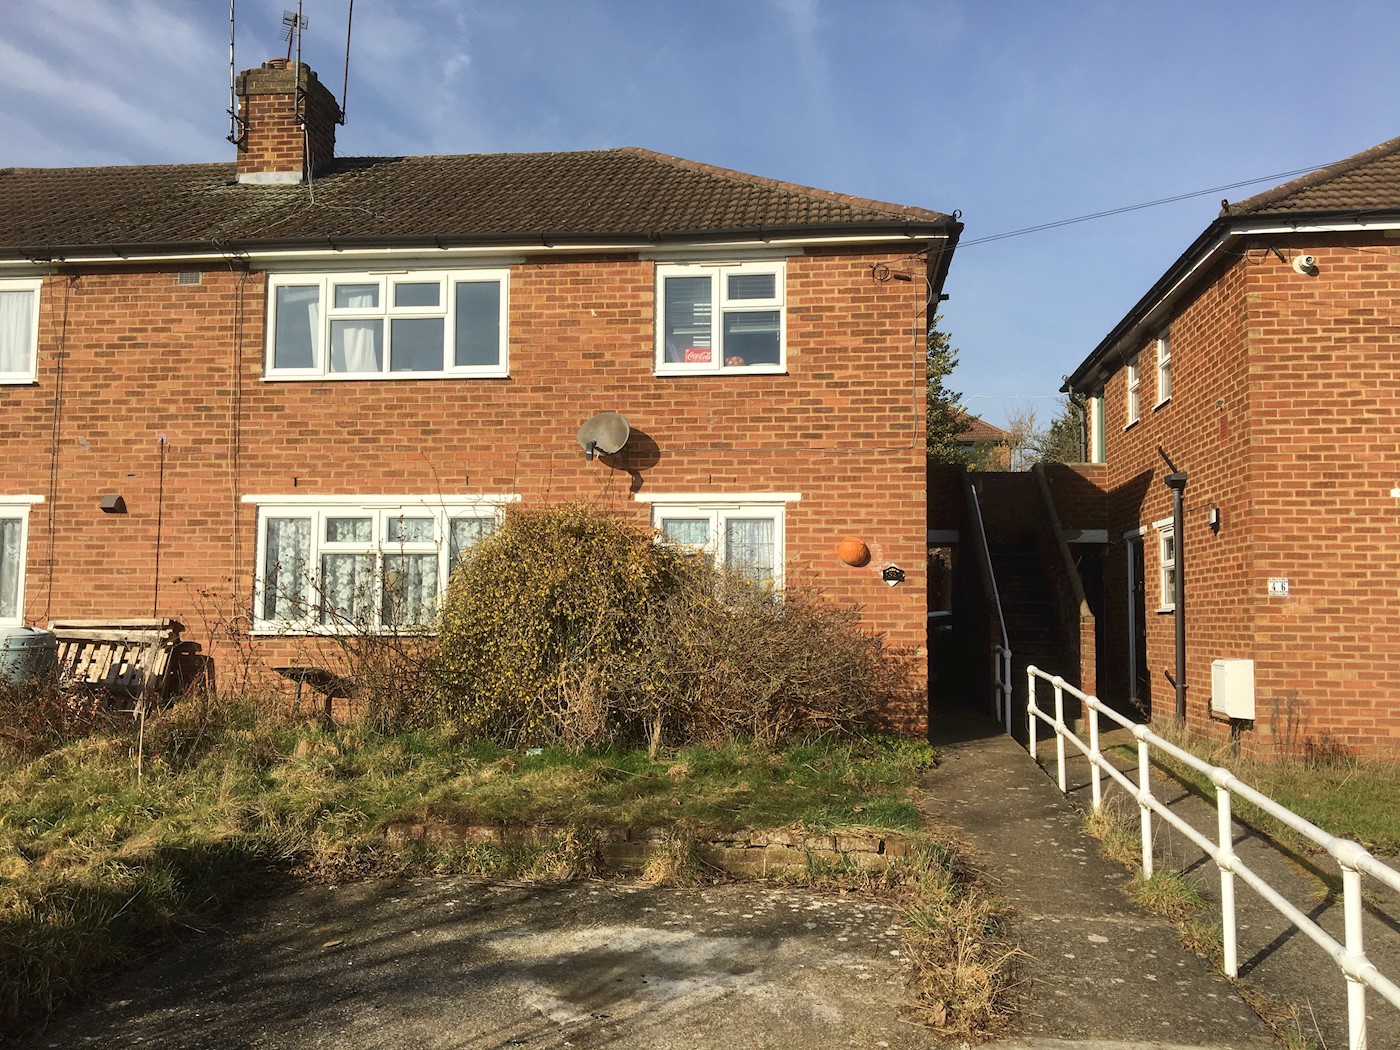 52 Cleve Road, Sidcup, DA14 4RR 1/8